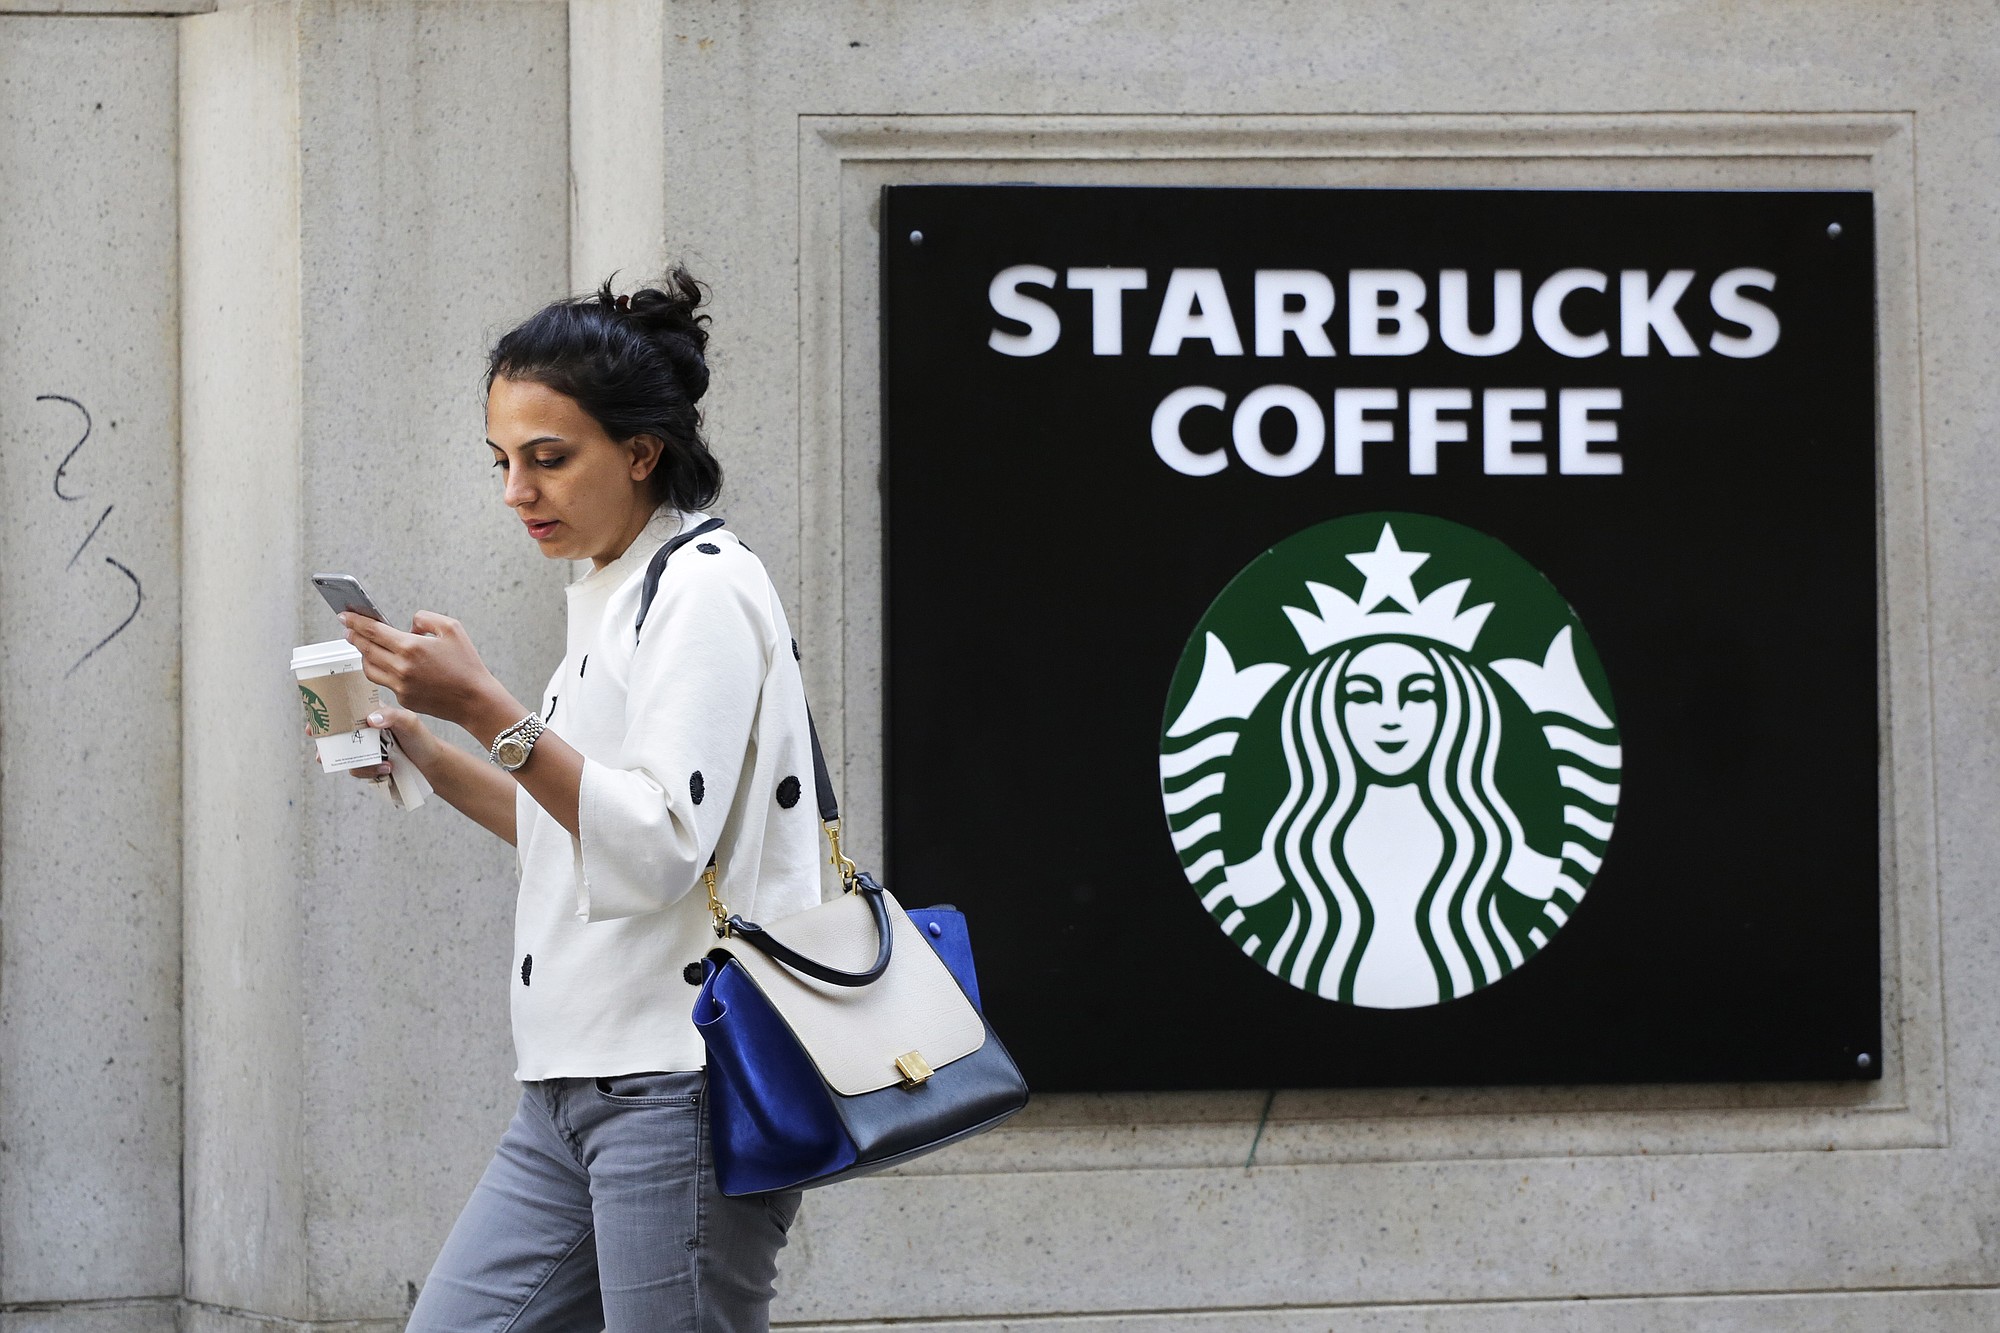 Associated Press files
A woman walks out of a Starbucks Coffee hop with a beverage in hand in New York.